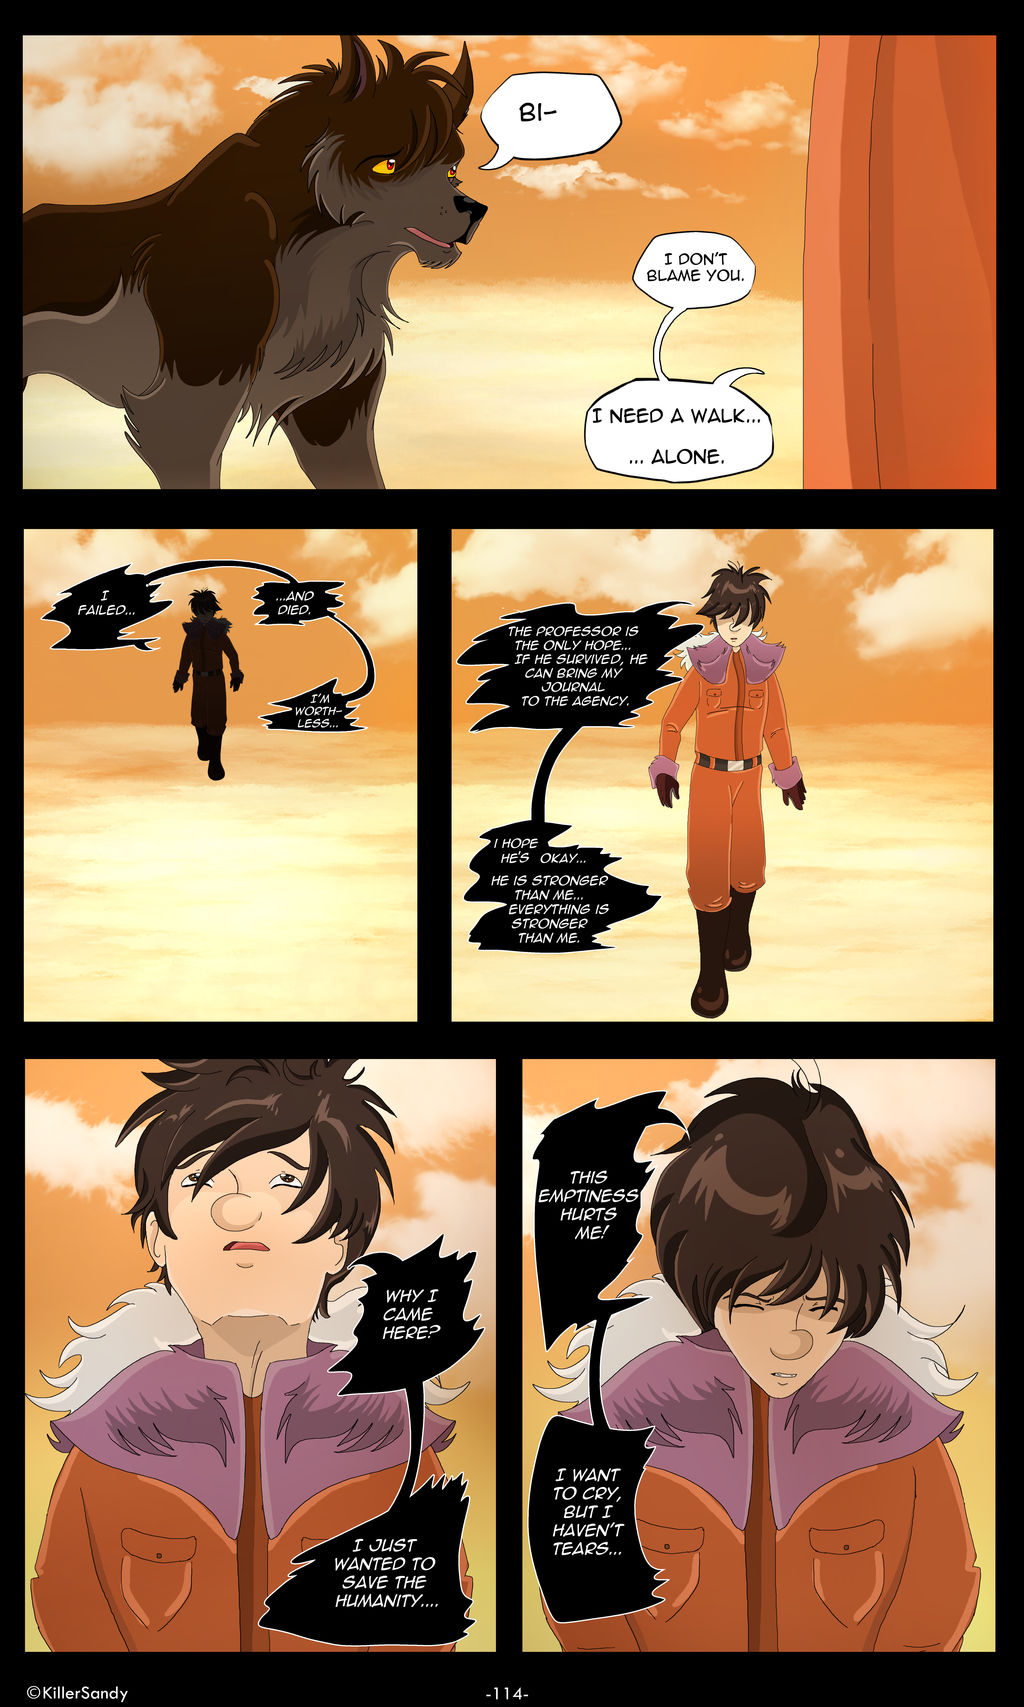 The Prince of the Moonlight Stone page 114